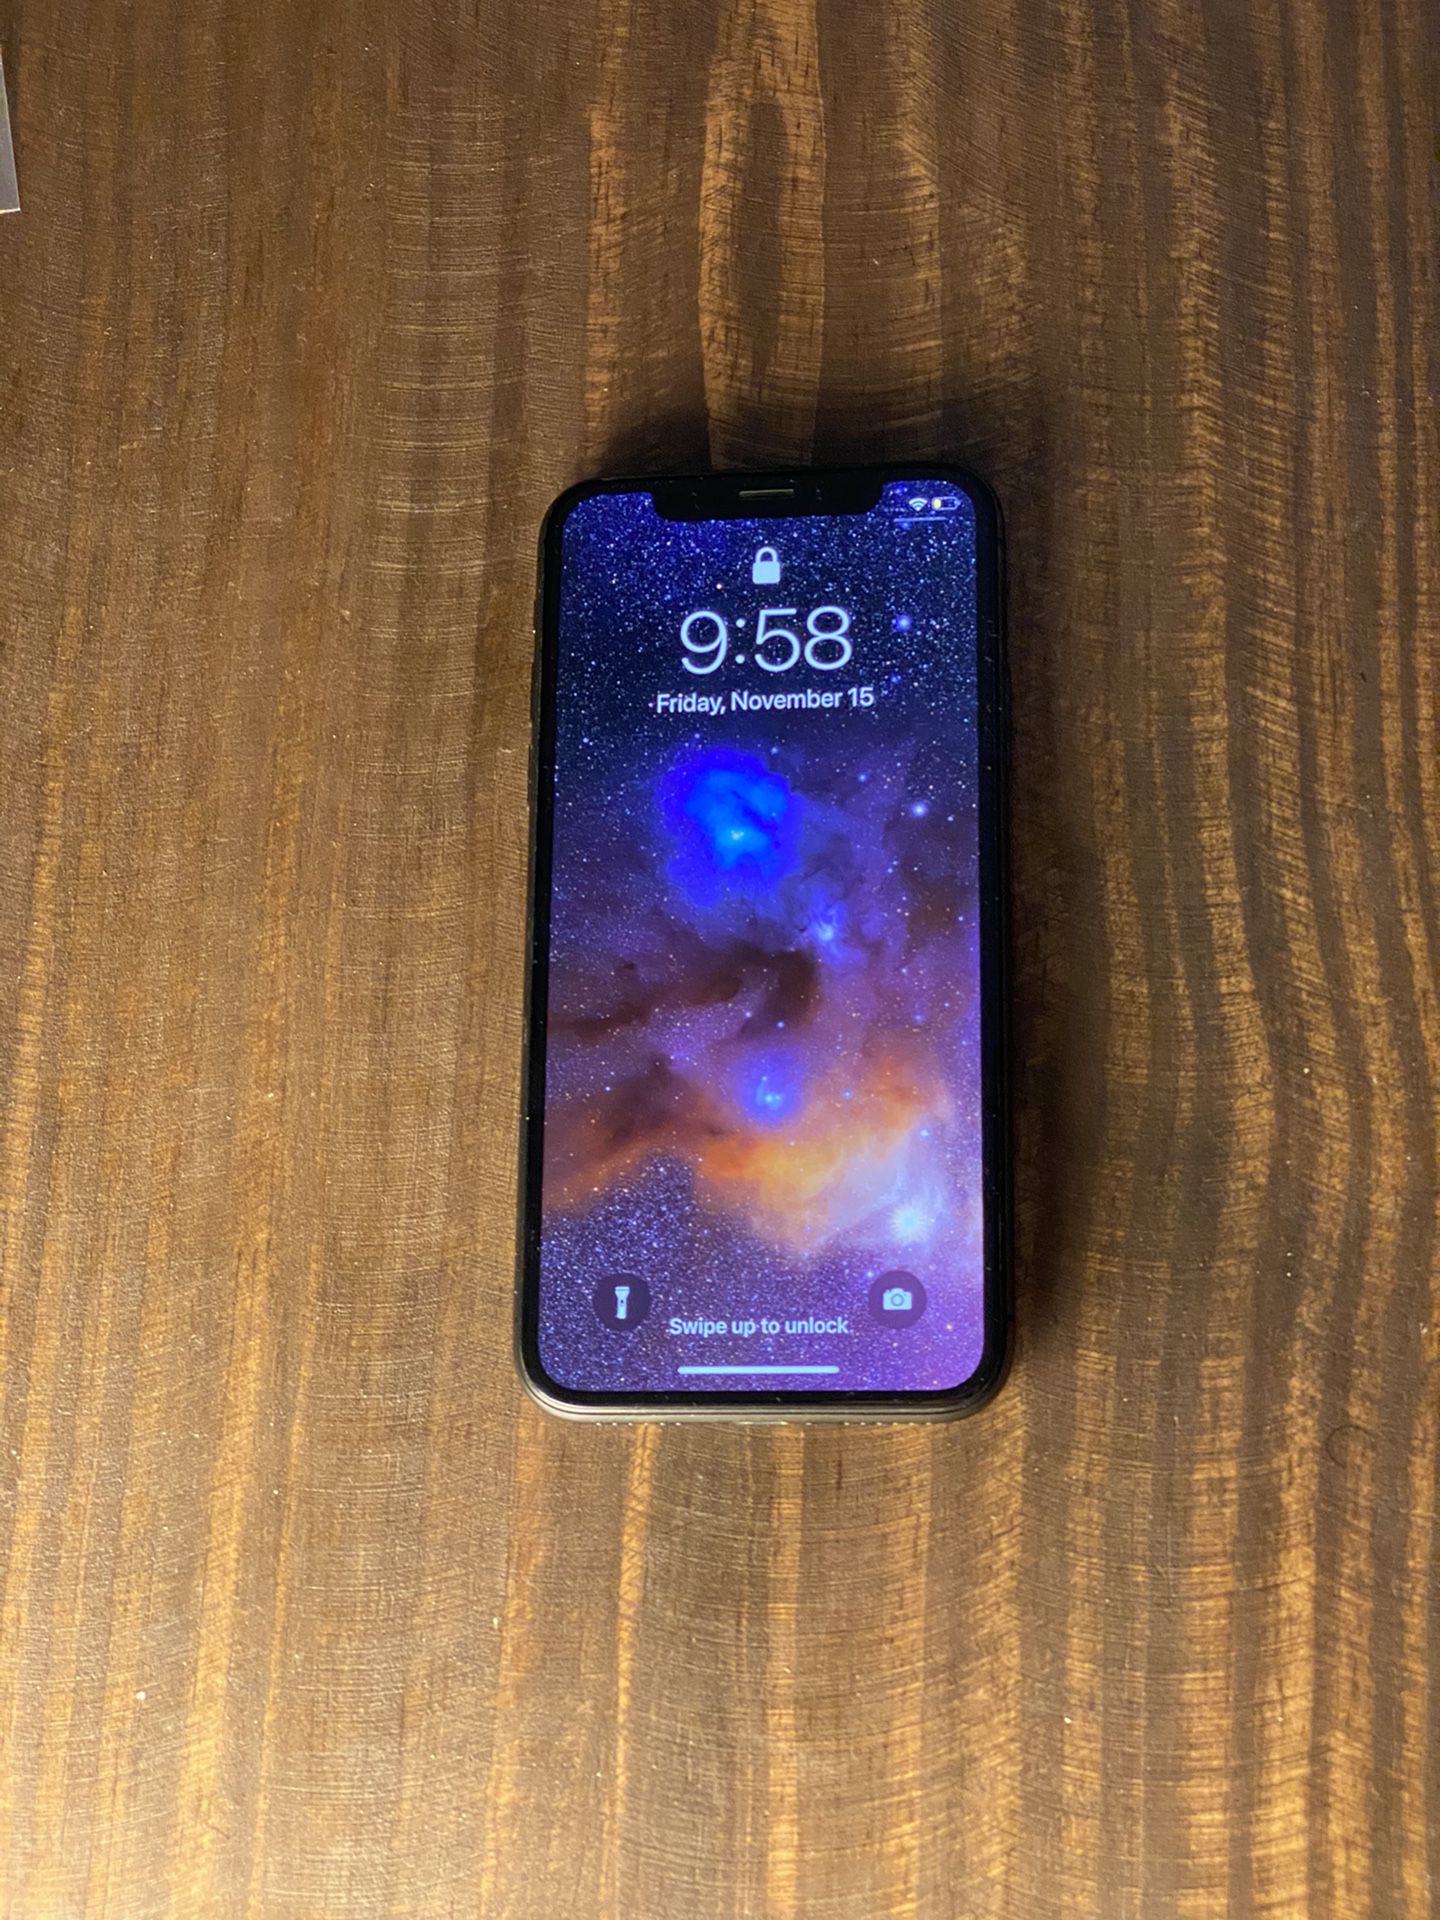 iPhone X - 64GB - Unlocked. Like new. Cases included